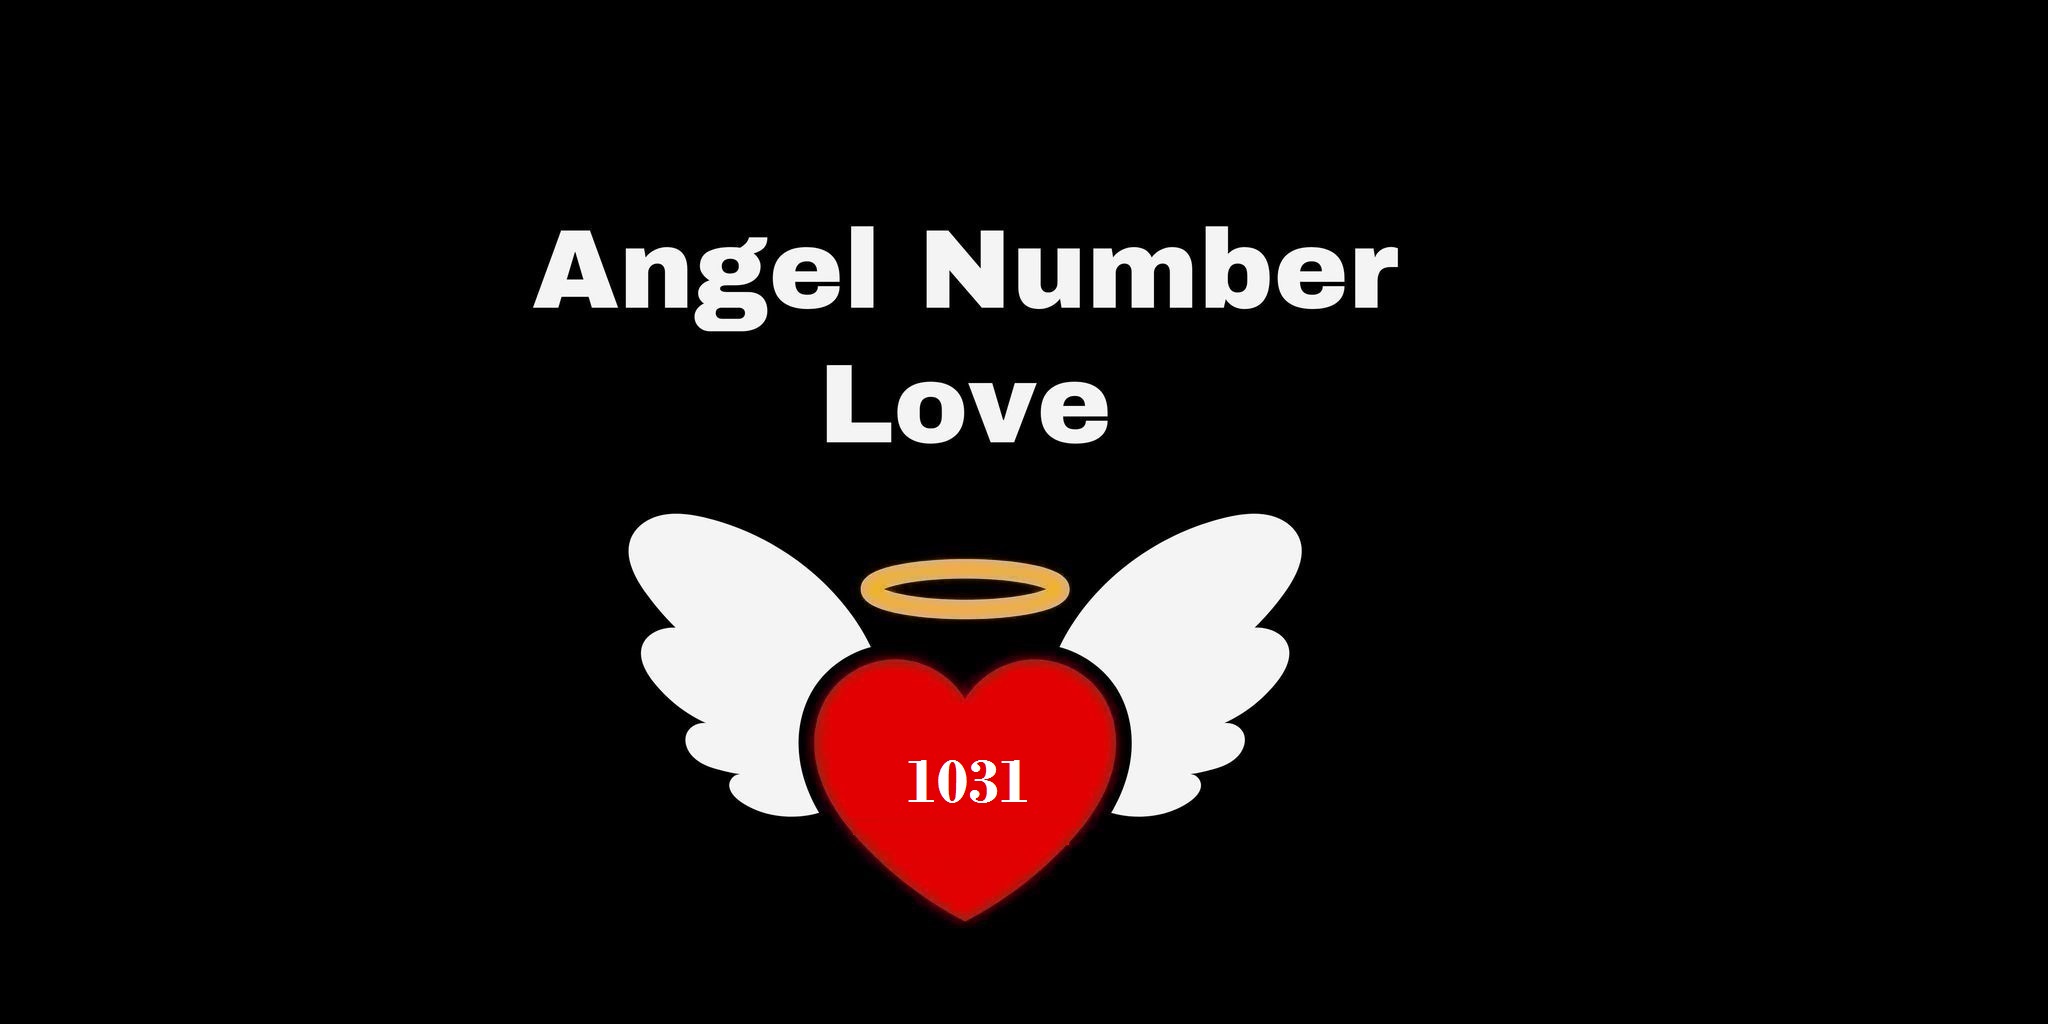 1031 Angel Number Meaning In Love